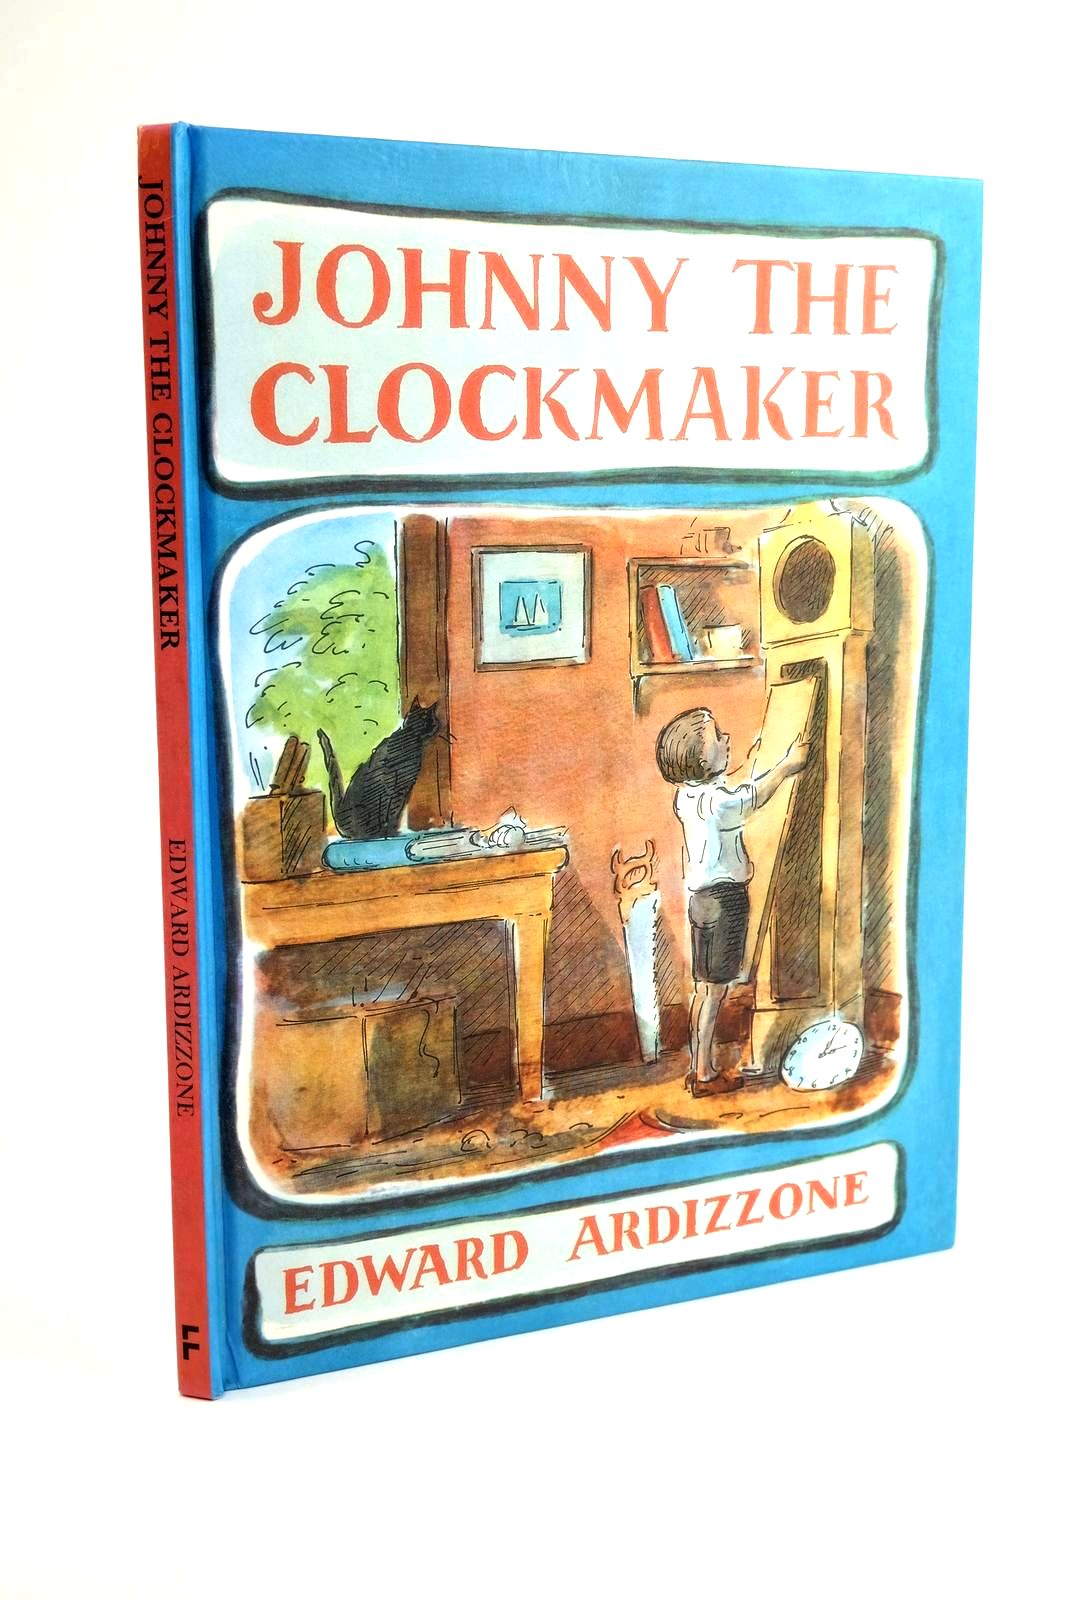 Photo of JOHNNY THE CLOCKMAKER written by Ardizzone, Edward illustrated by Ardizzone, Edward published by Frances Lincoln Children's Books (STOCK CODE: 1323294)  for sale by Stella & Rose's Books